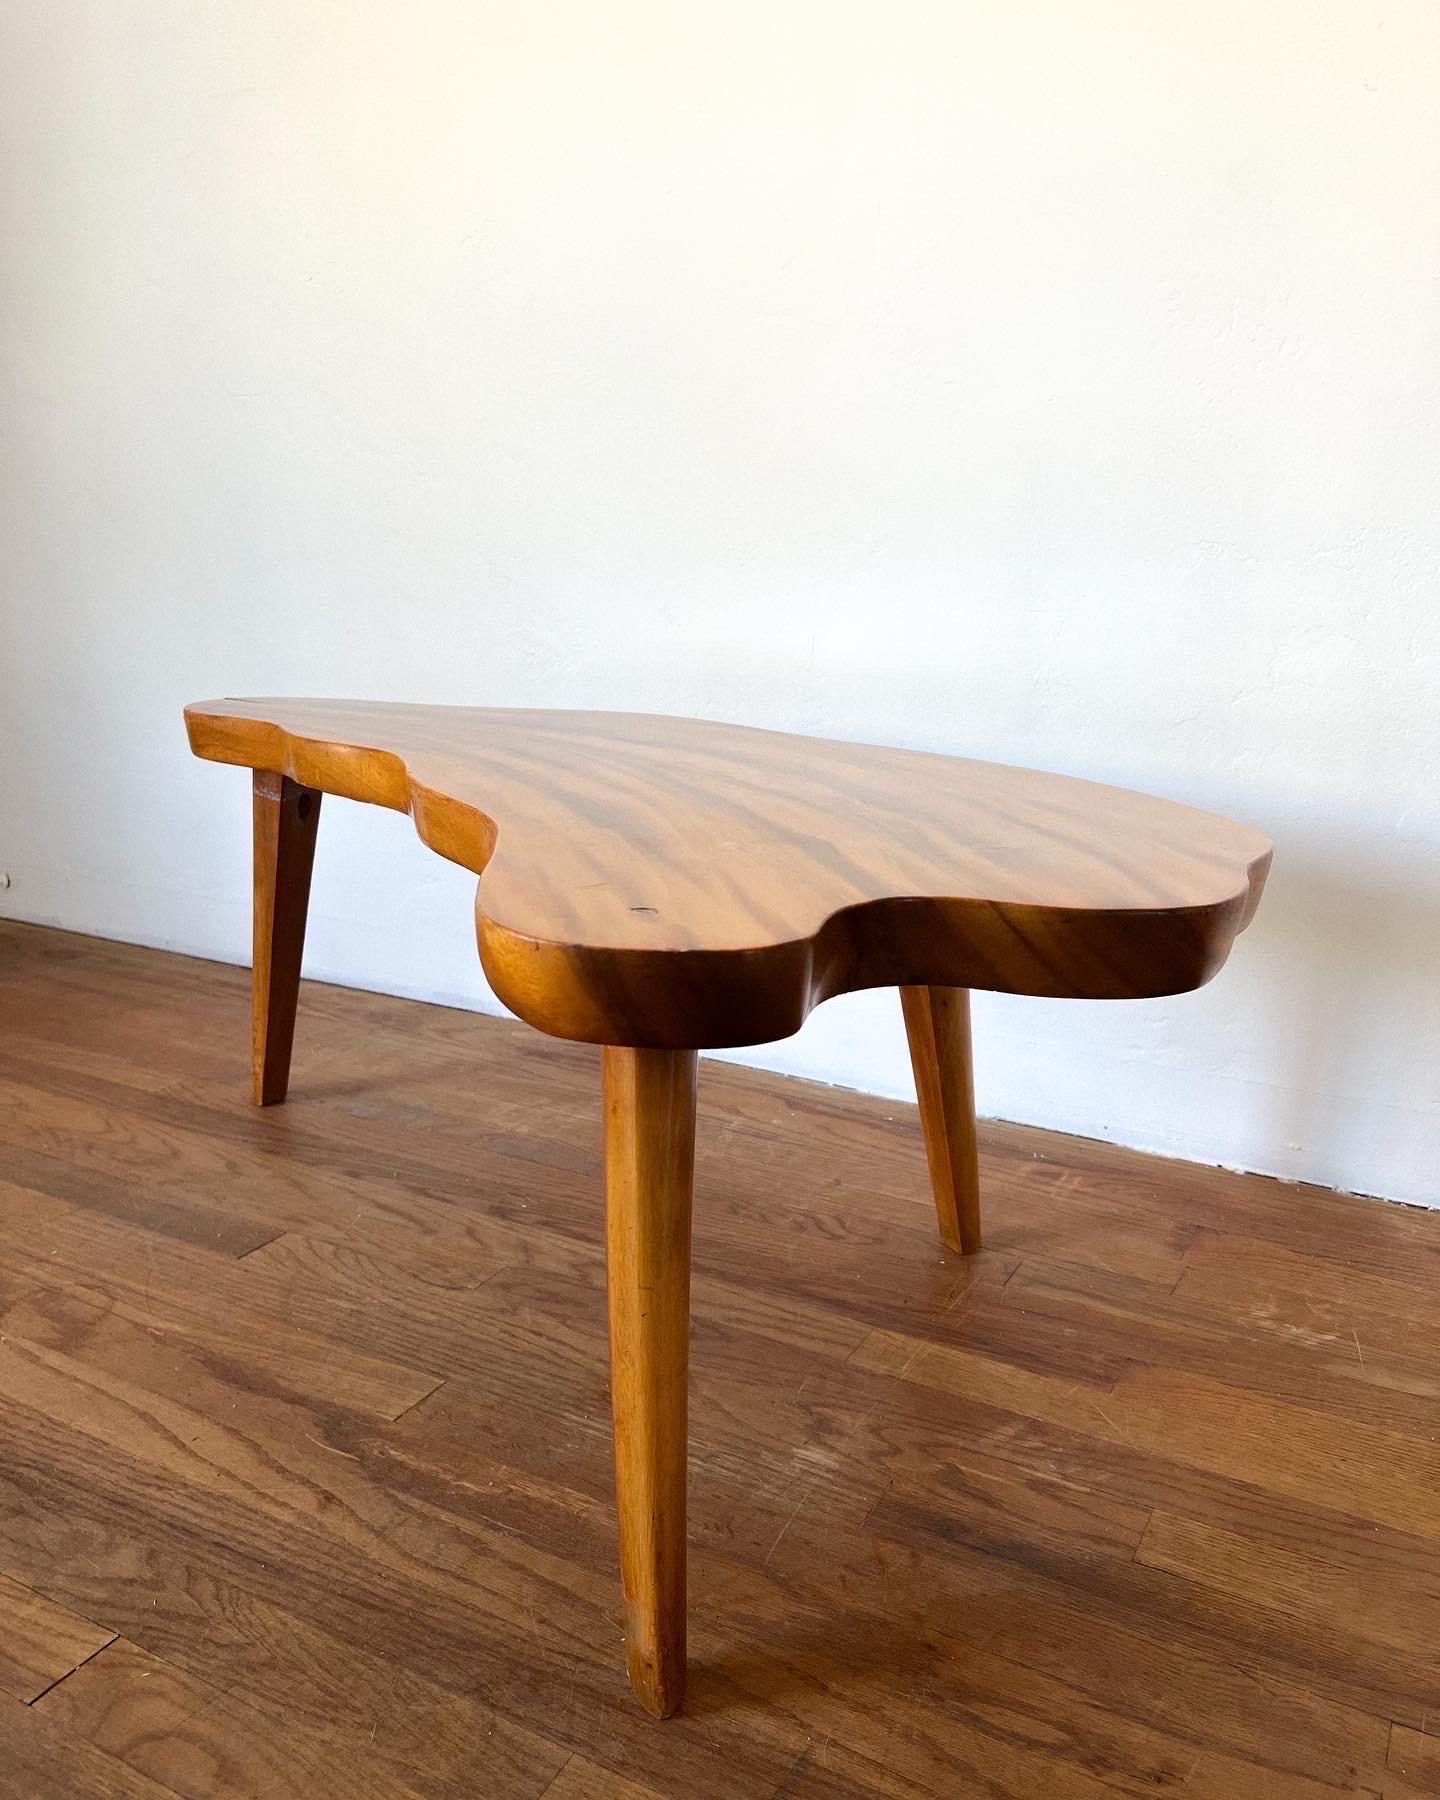 Beautiful three-legged solid Thick Koa wood, free-form coffee table, high gloss clear lacquer solid top. Sitting on three solid lacquered legs, nice grain and unique shape very nice and clean condition.